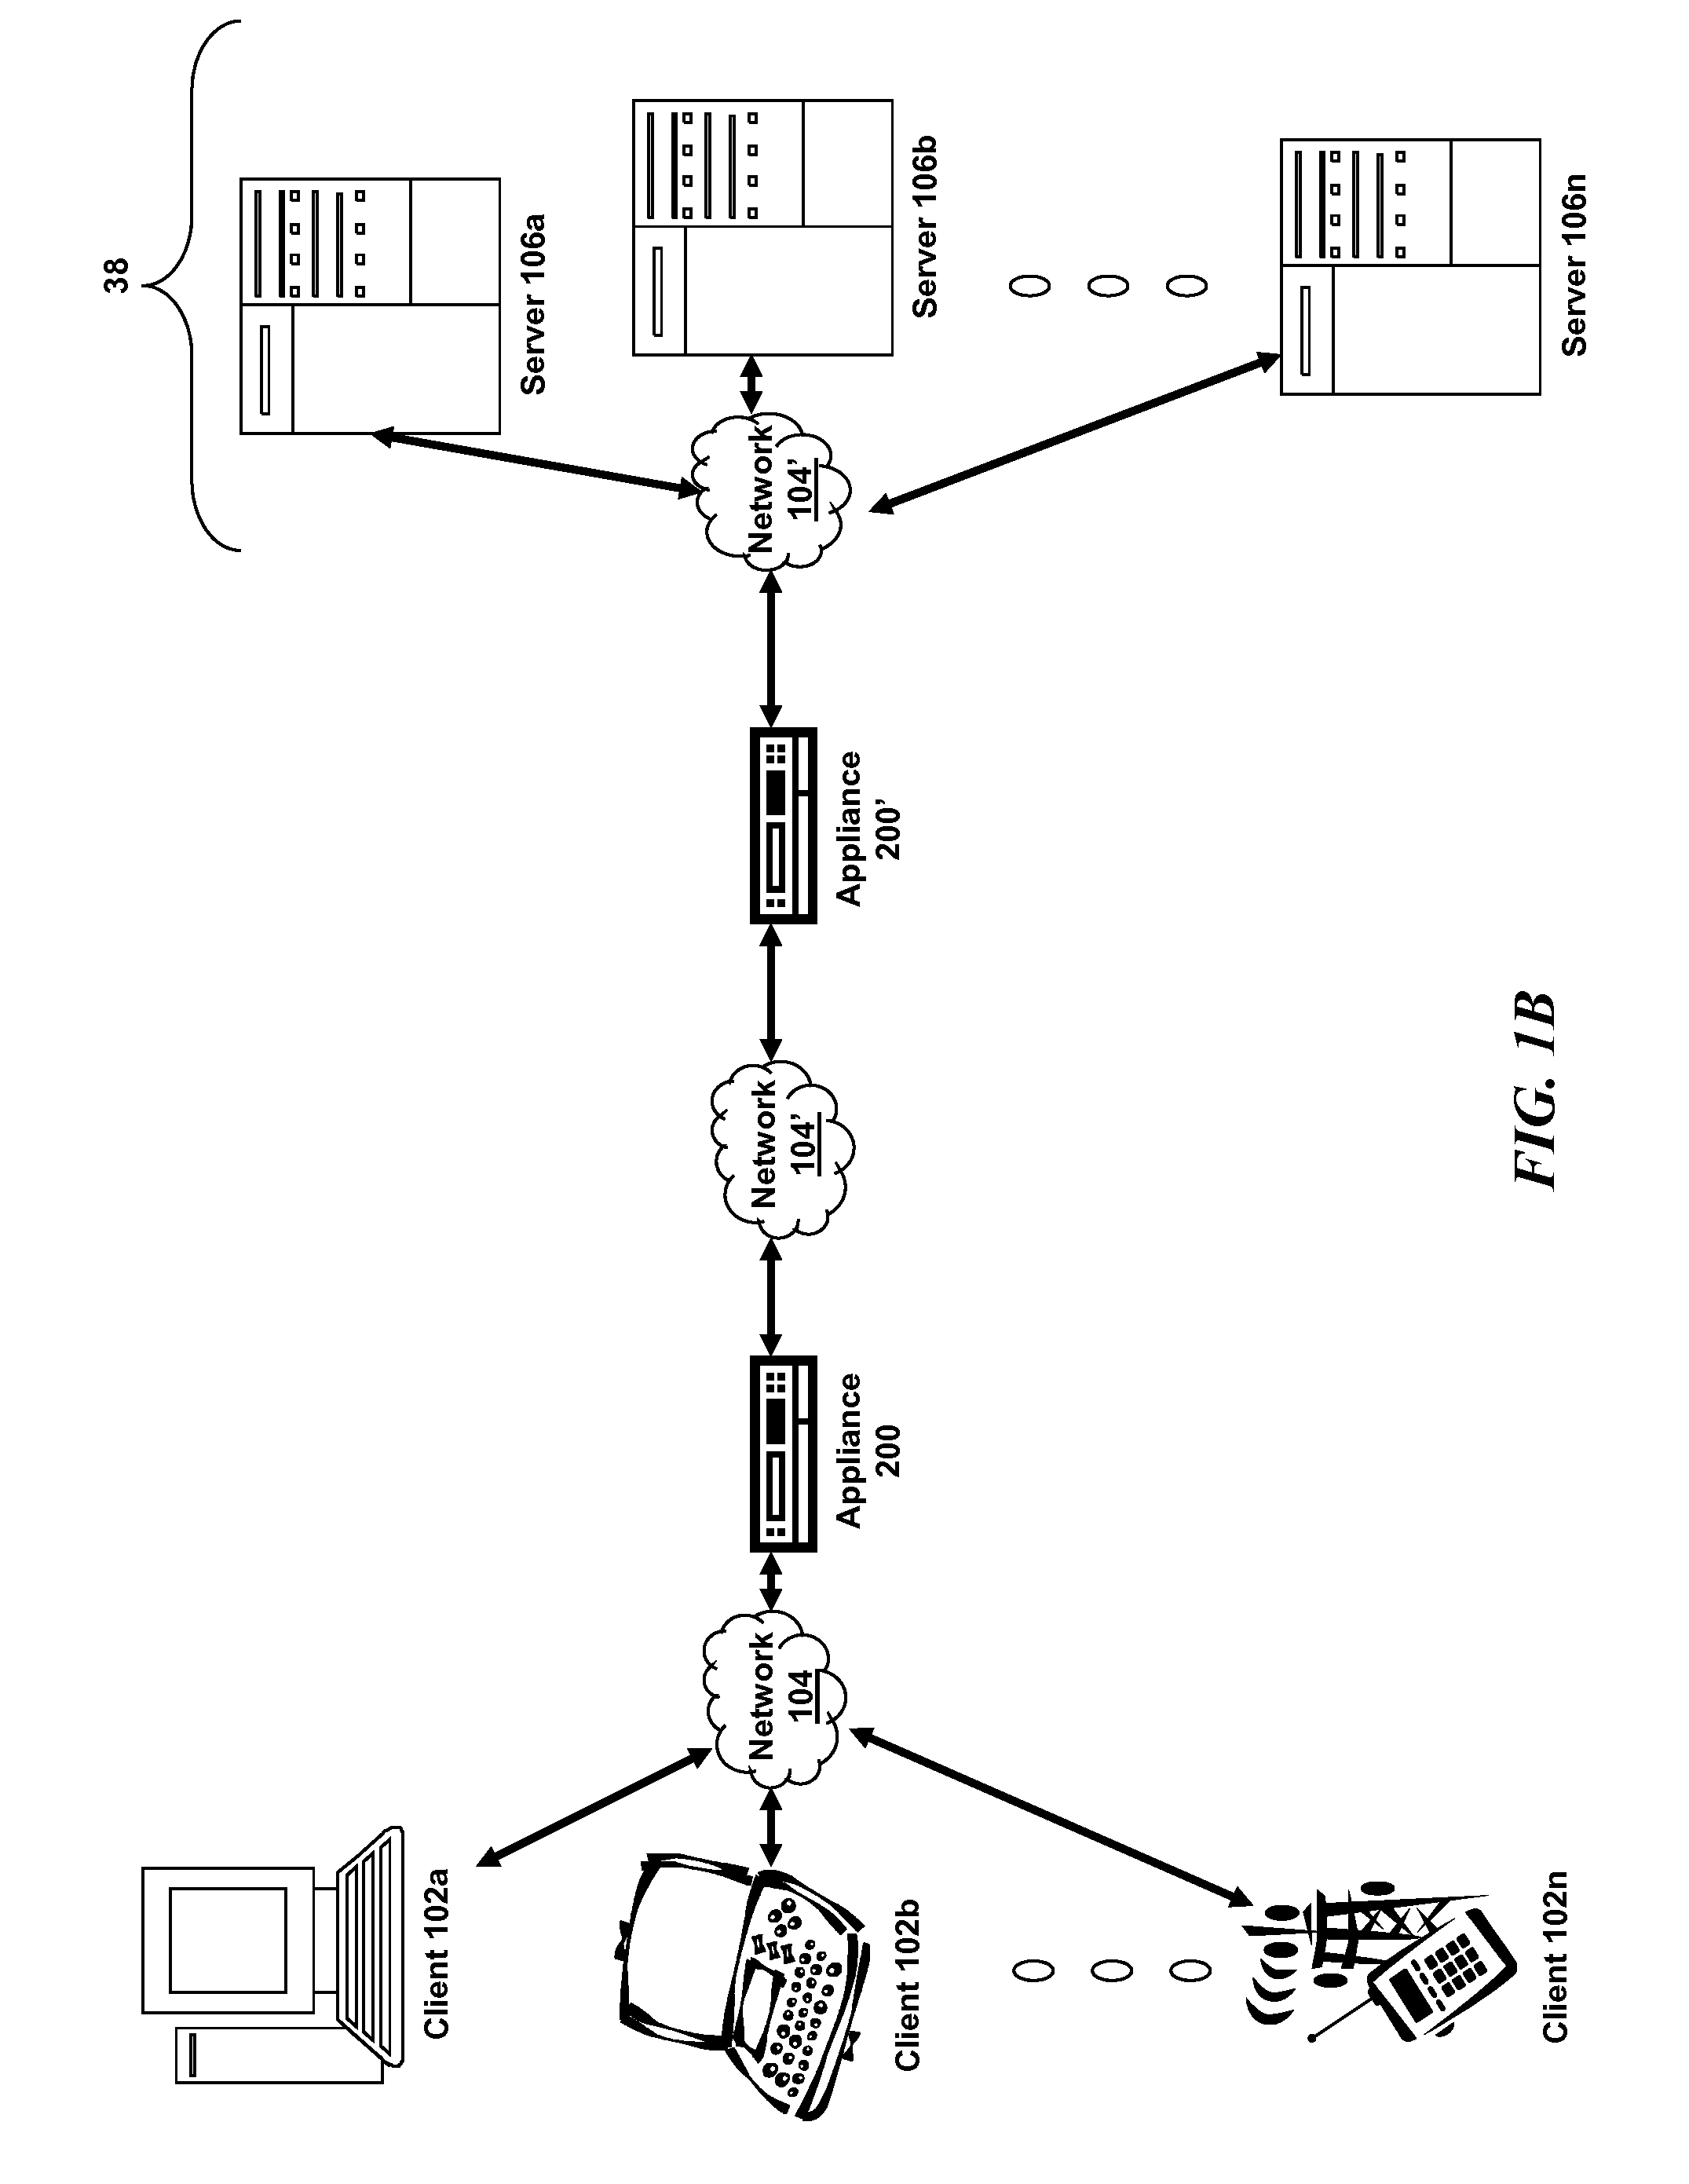 Systems and methods for multipath transmission control protocol connection management